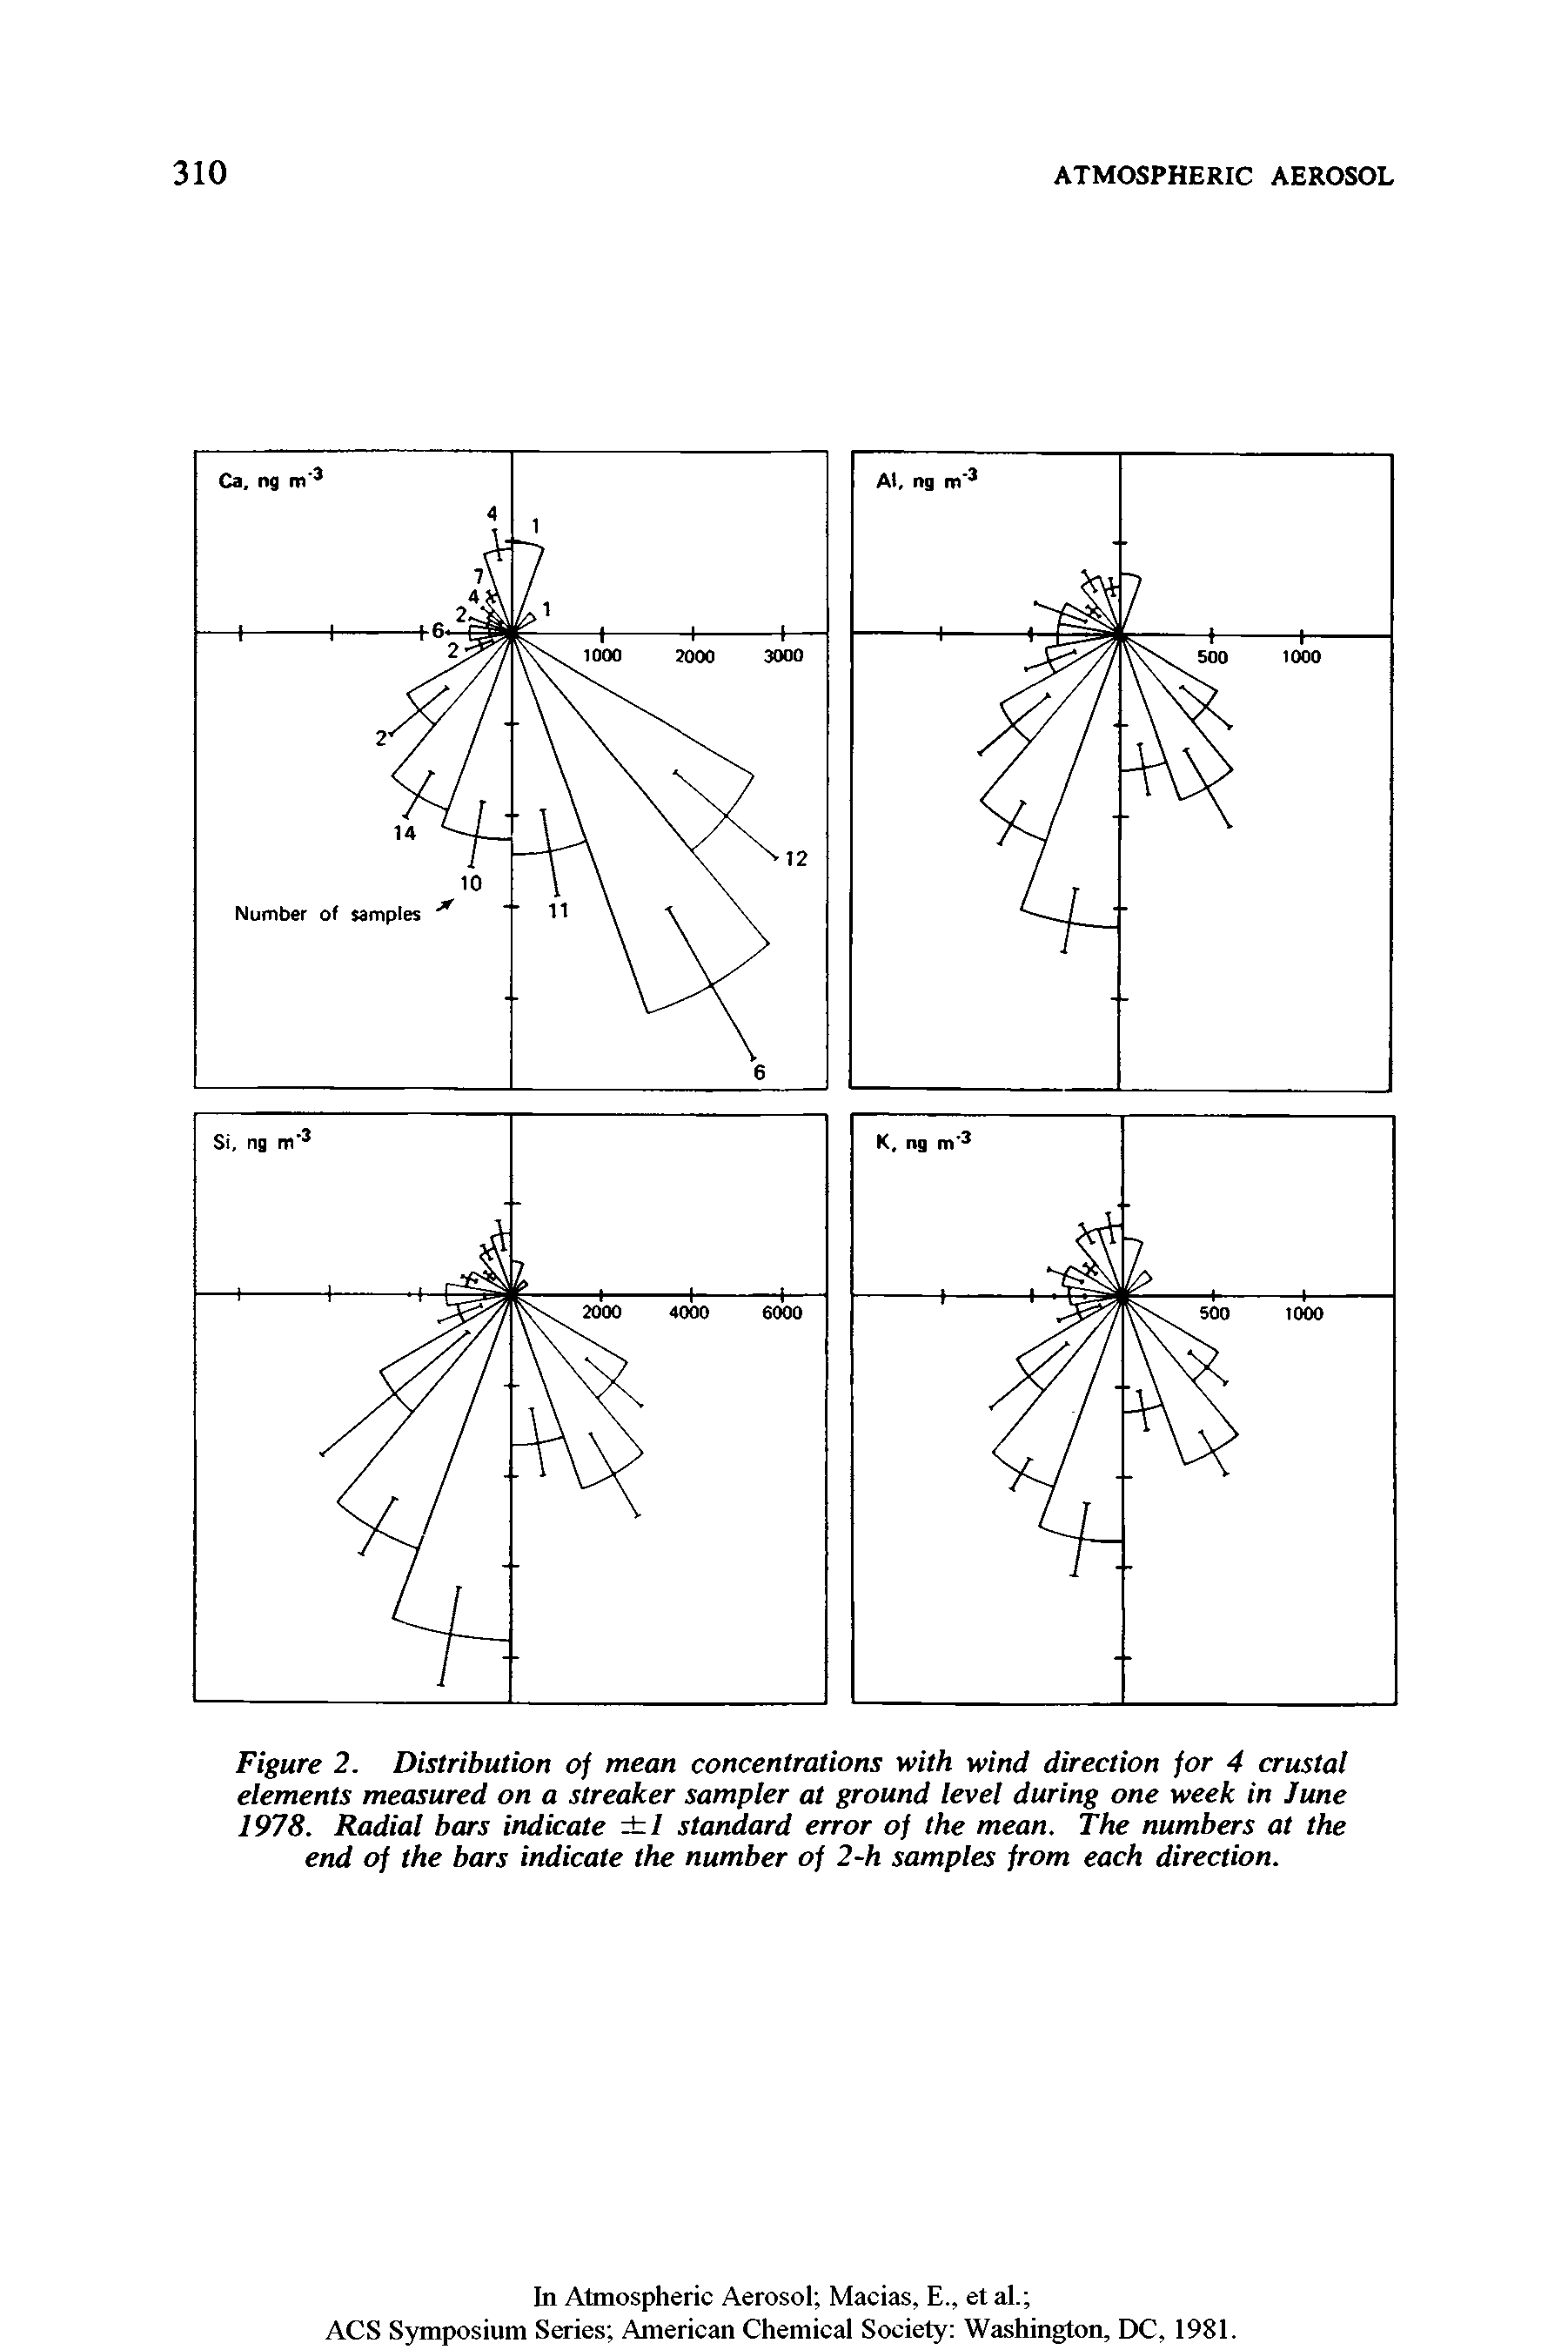 Figure 2. Distribution of mean concentrations with wind direction for 4 crustal elements measured on a streaker sampler at ground level during one week in June 1978. Radial bars indicate I standard error of the mean. The numbers at the end of the bars indicate the number of 2-h samples from each direction.